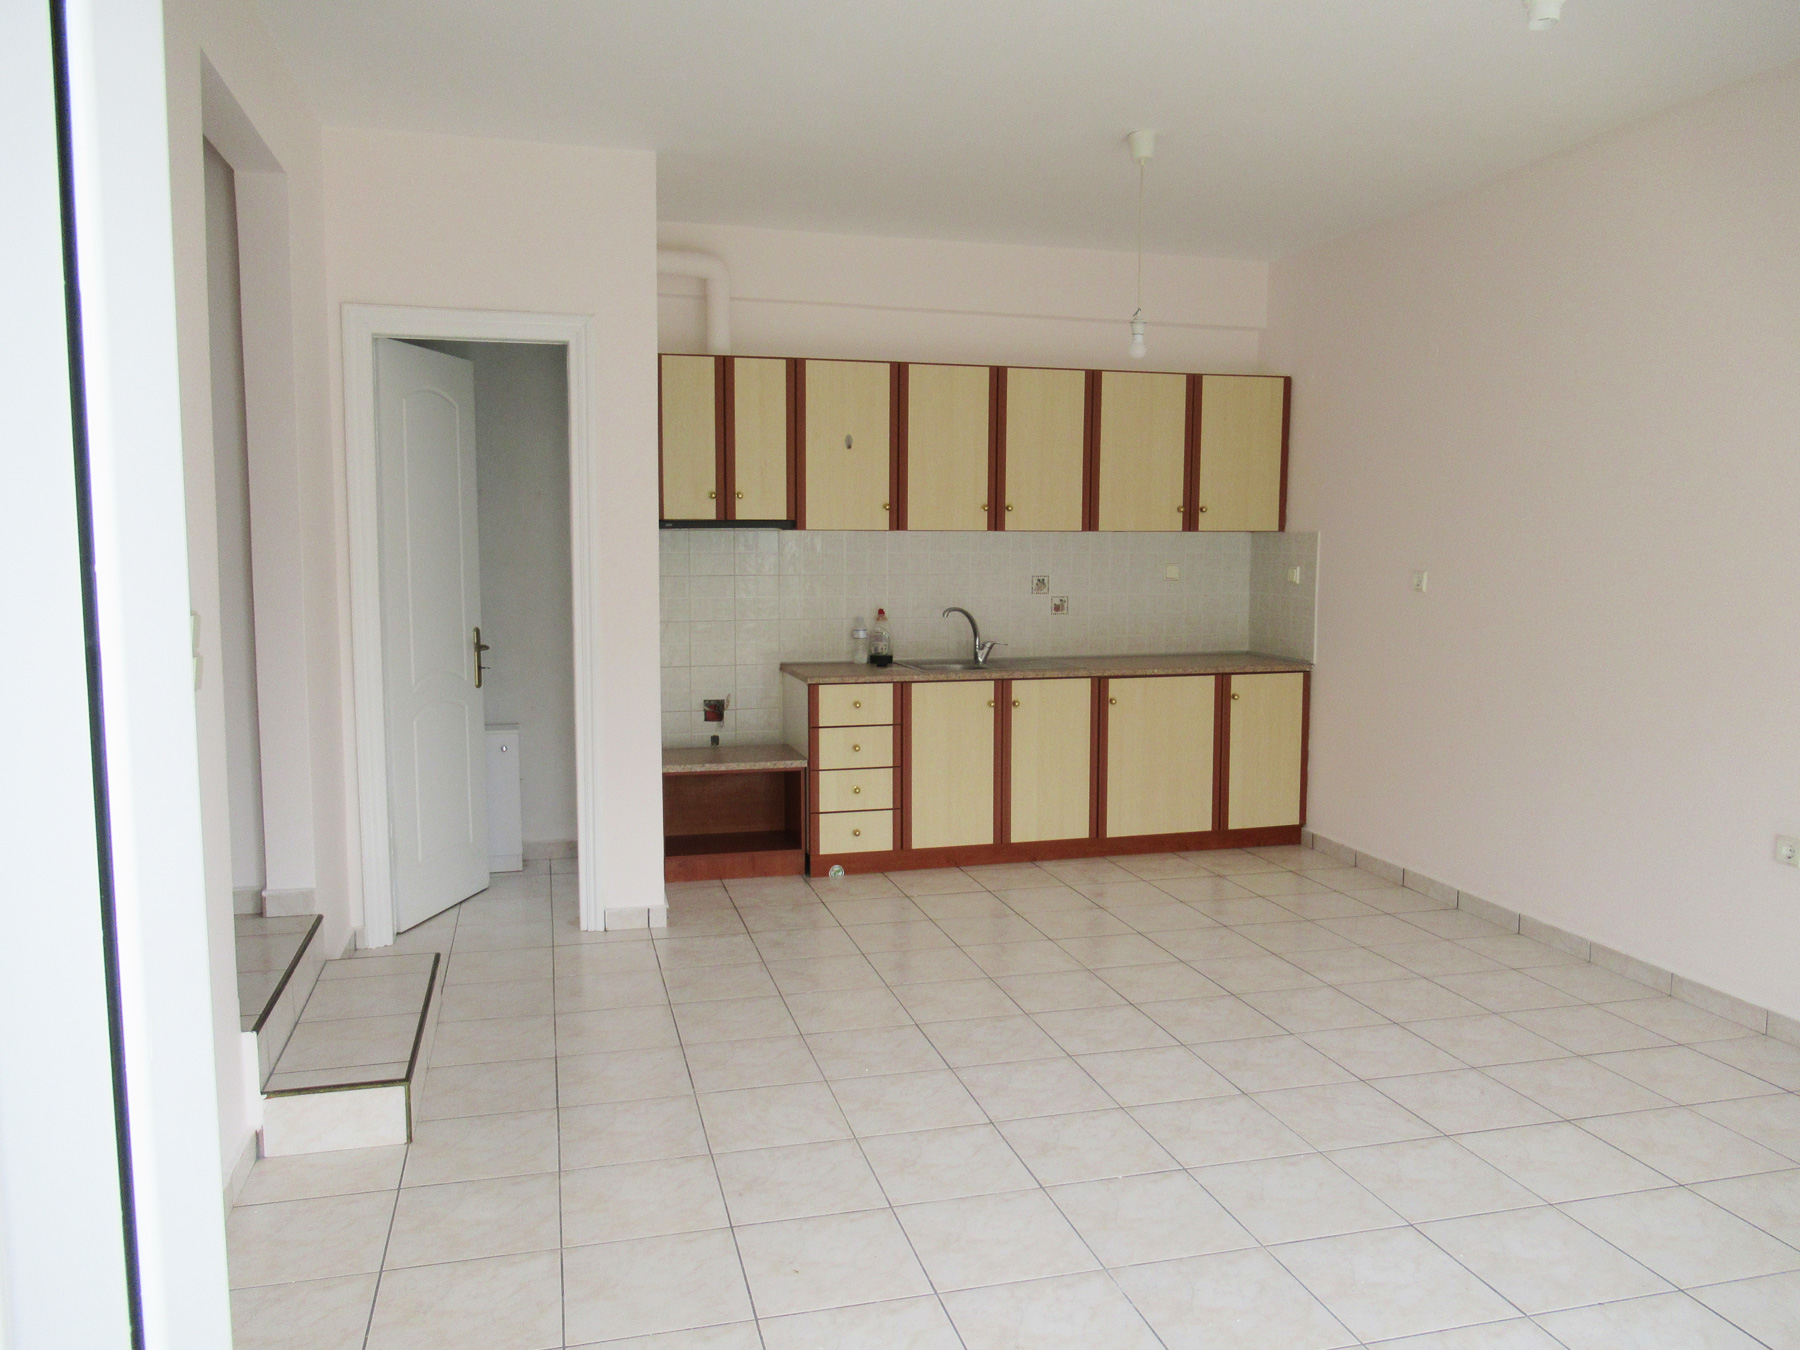 For rent newly built 2 bedroom apartment of 48 sq.m. on the 1st floor in Anatoli Ioannina.